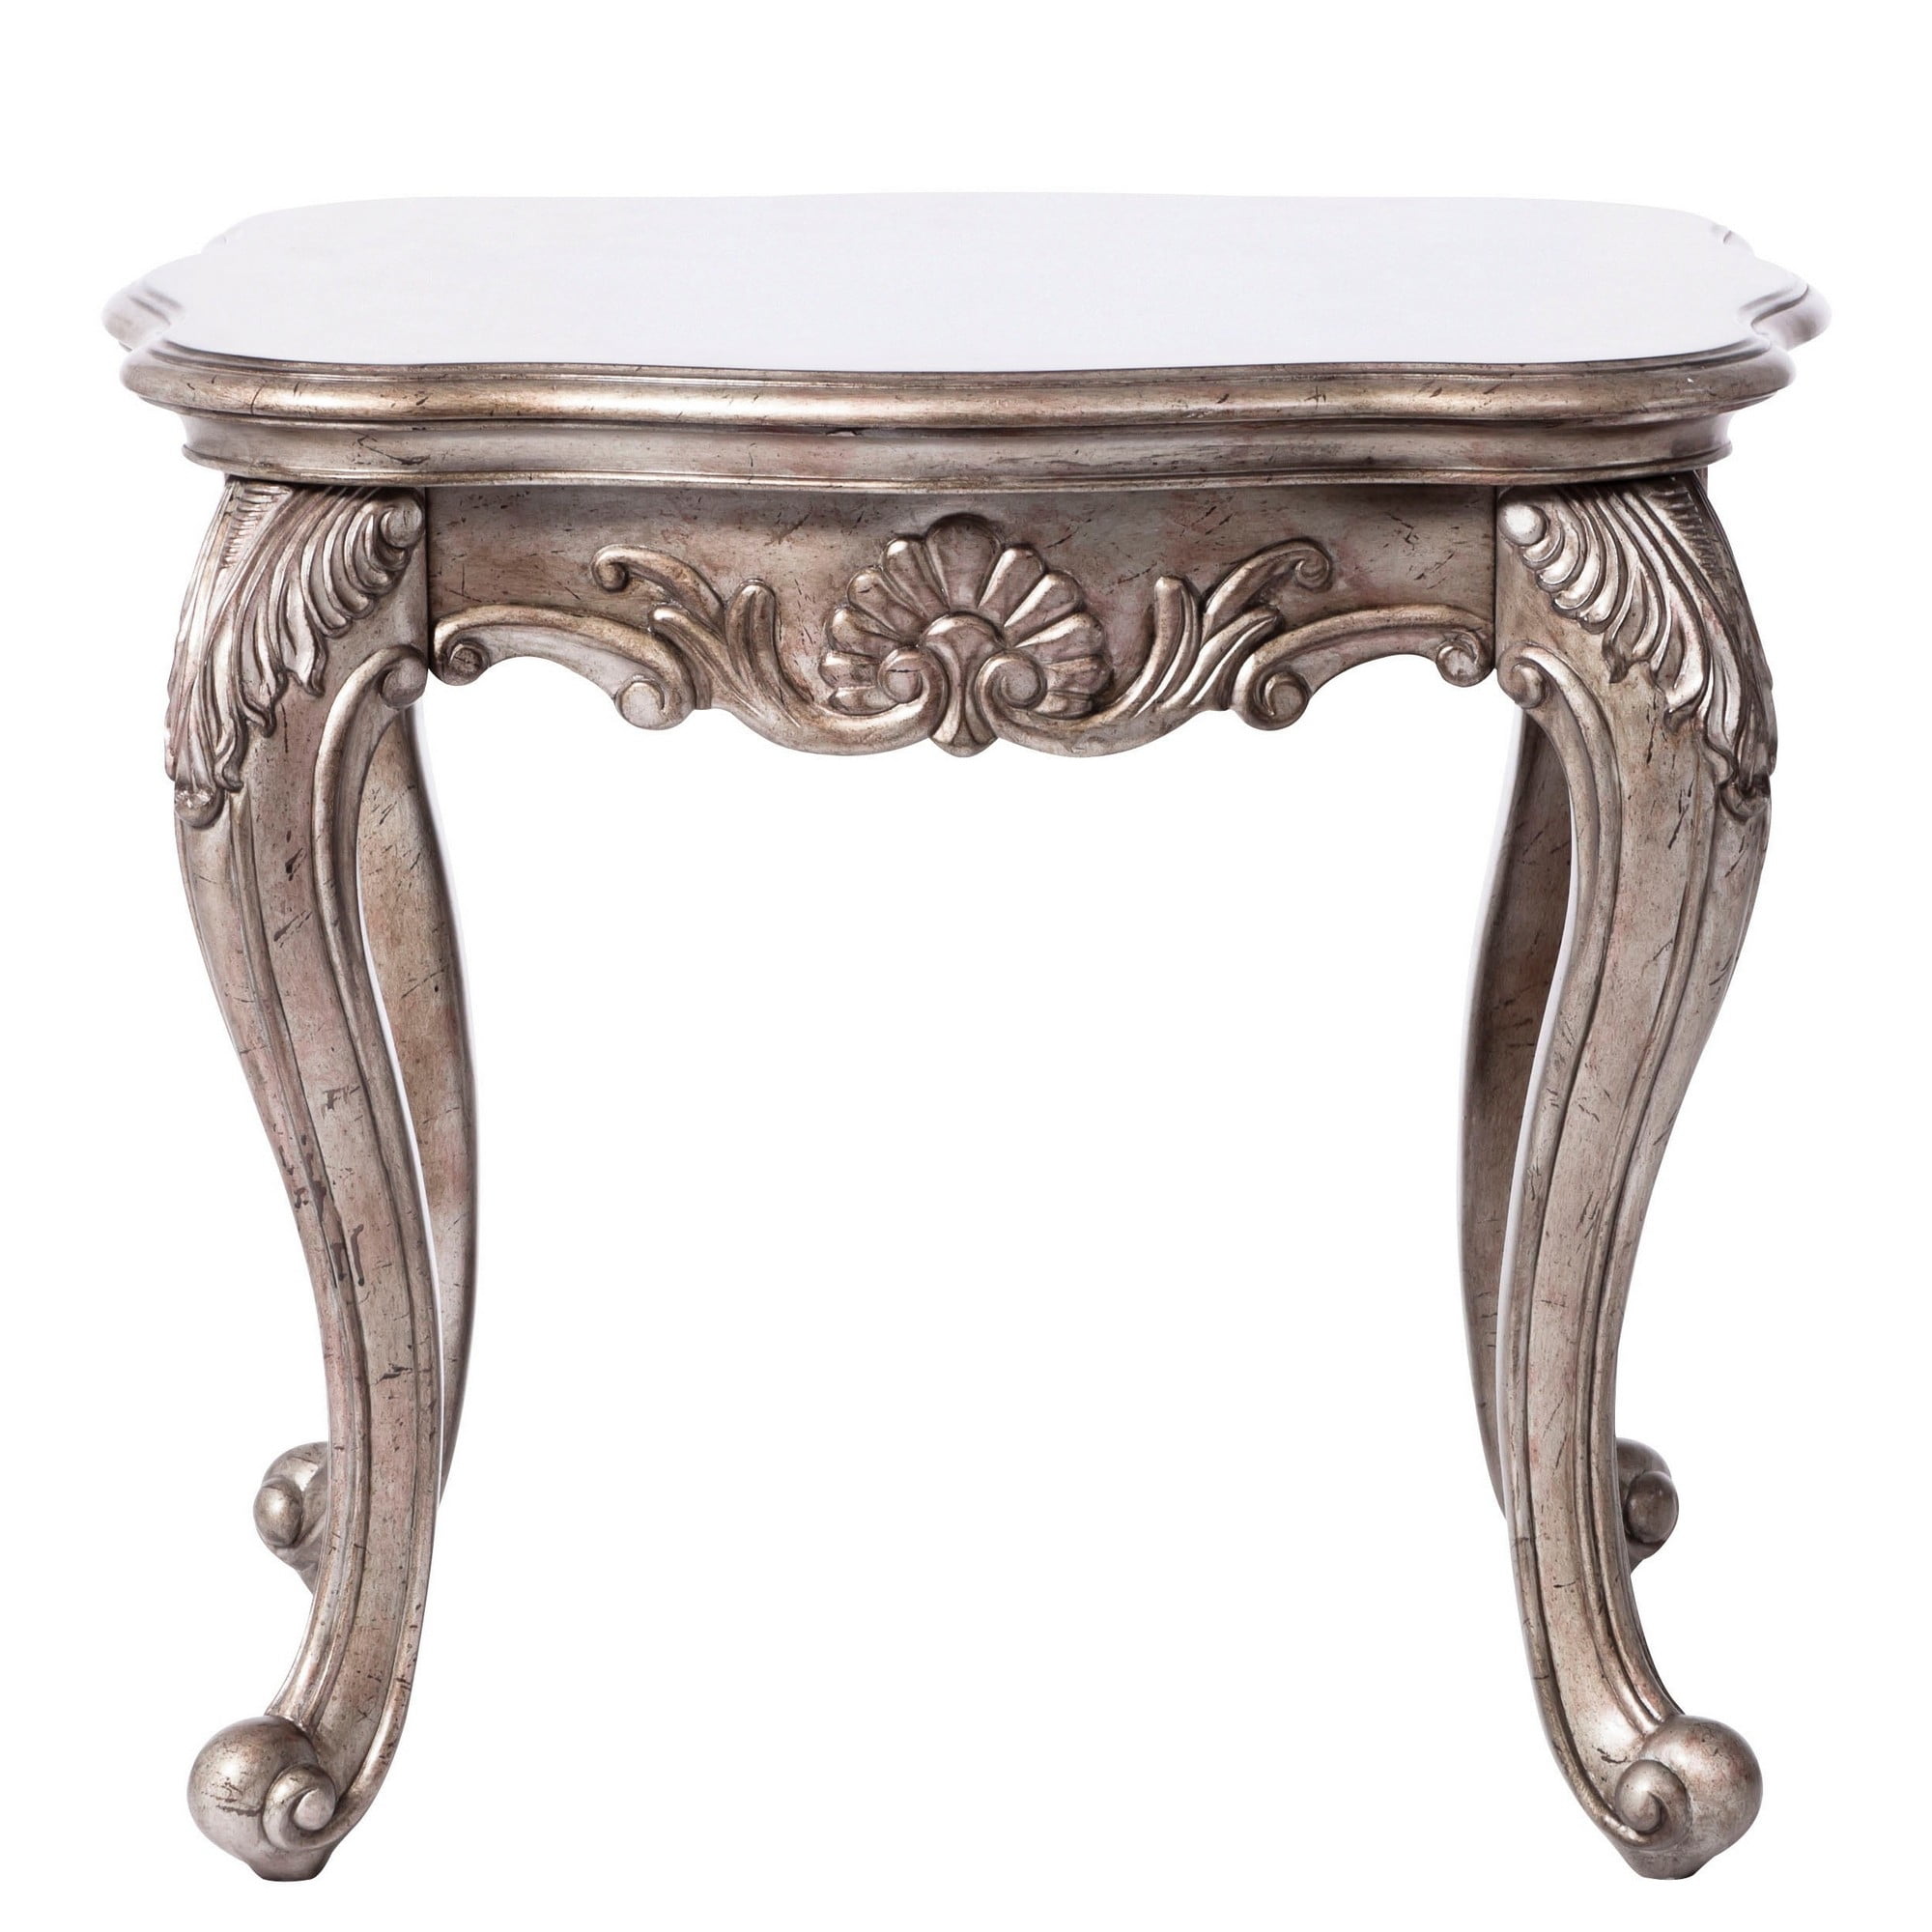 Wooden End Table with Intricately Carved Cabriole Legs, Antique Silver